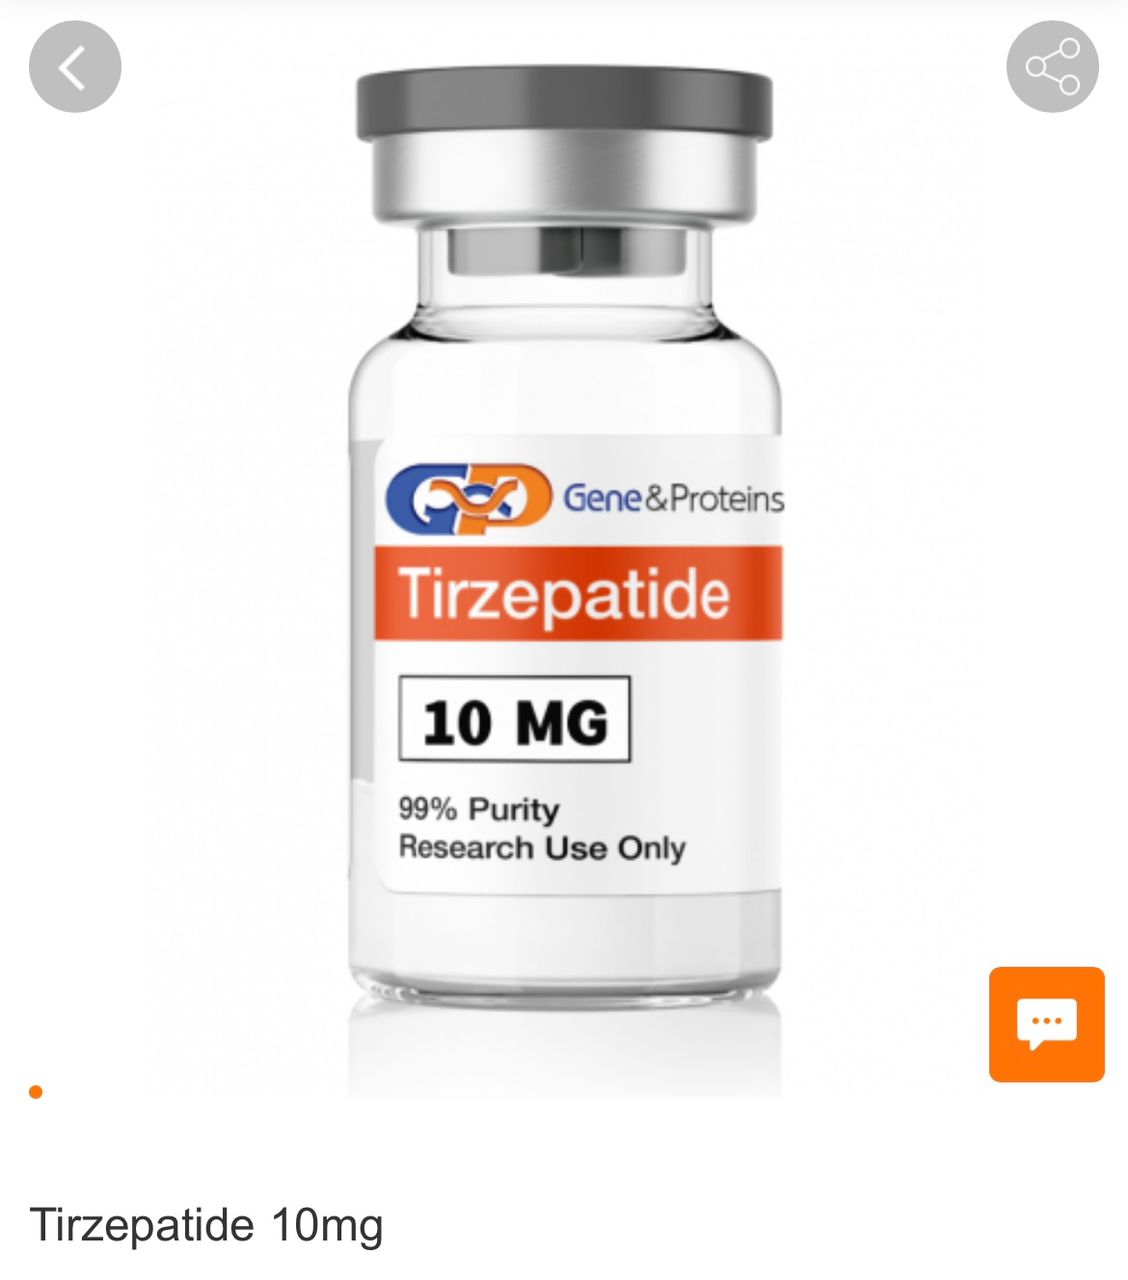 Order tirzepatide injections online with PayPal